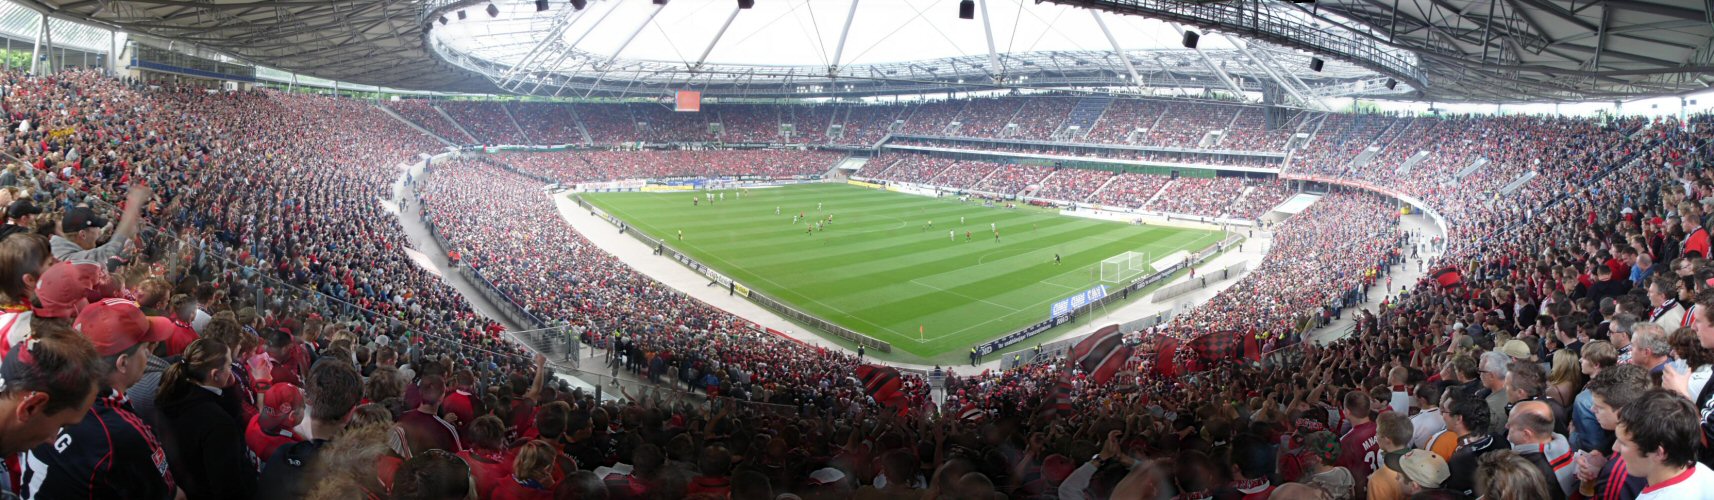 AWD Arena Hannover